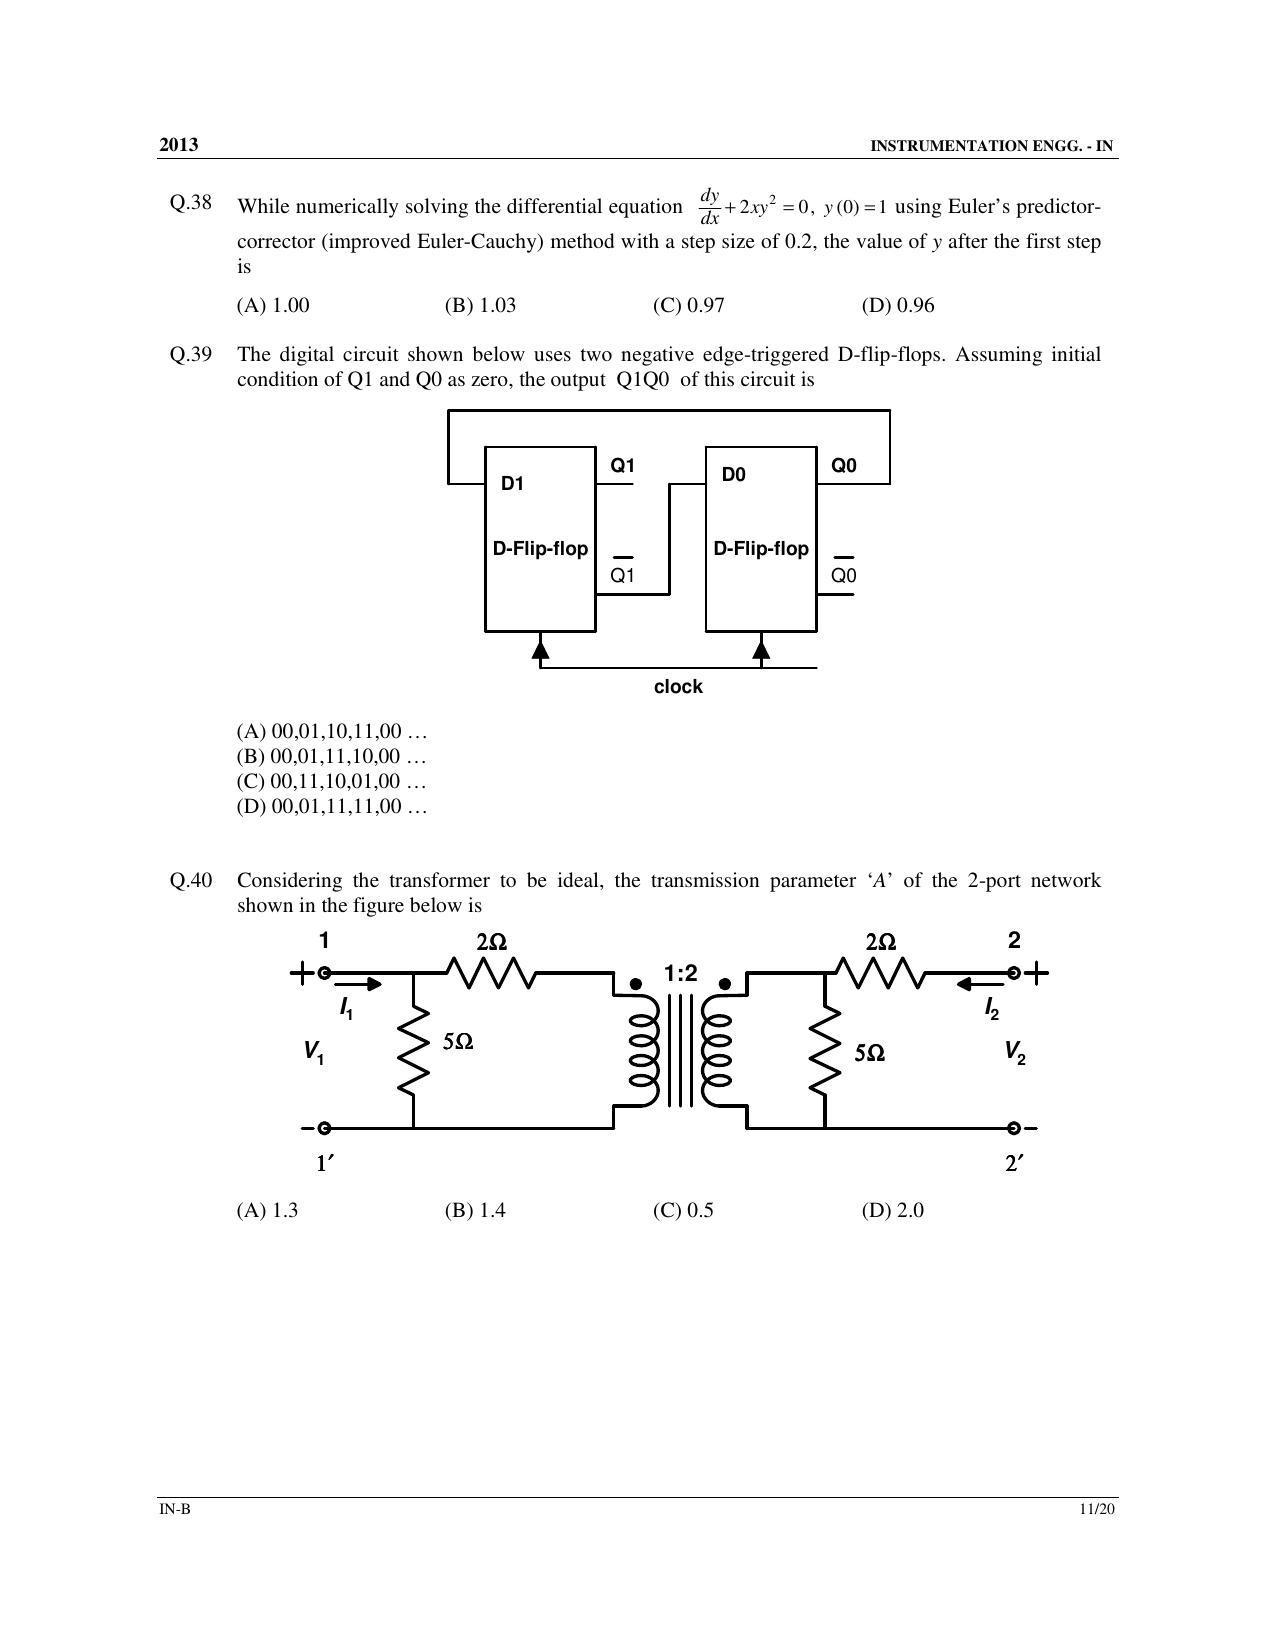 GATE 2013 Instrumentation Engineering (IN) Question Paper with Answer Key - Page 29